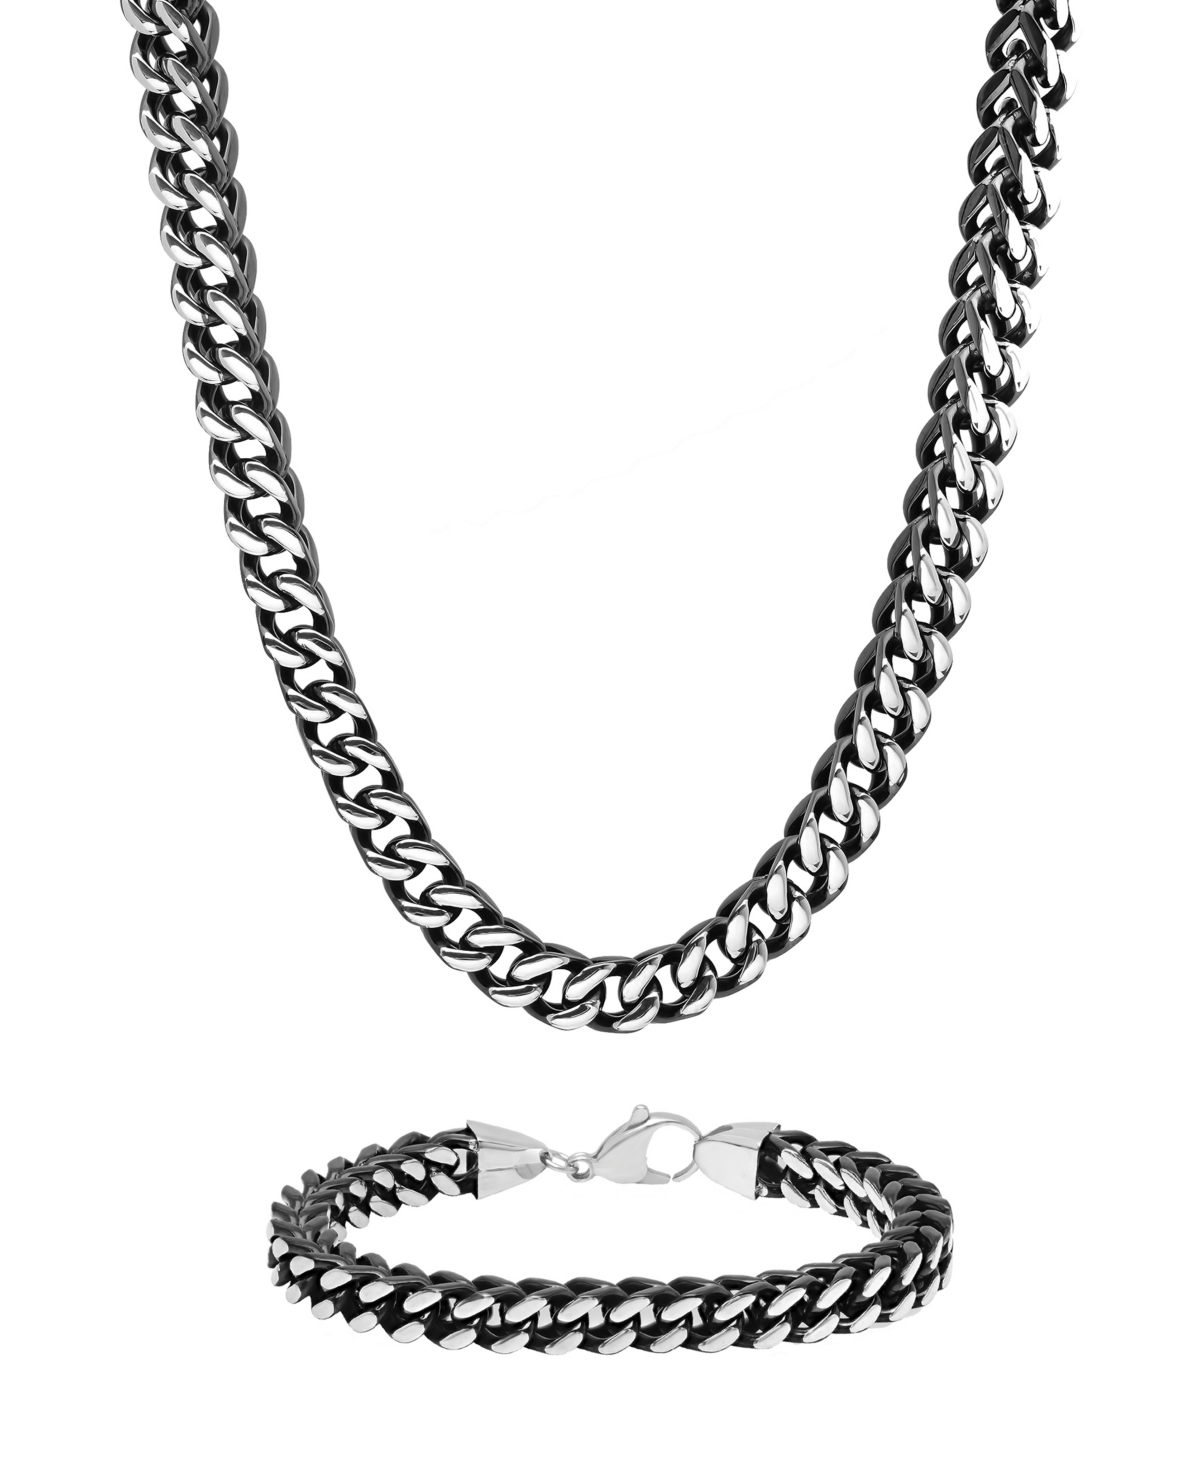 C & c Jewelry Macy's Men's Franco Link Chain Bracelet and Necklace Set in Two-Tone Stainless Steel